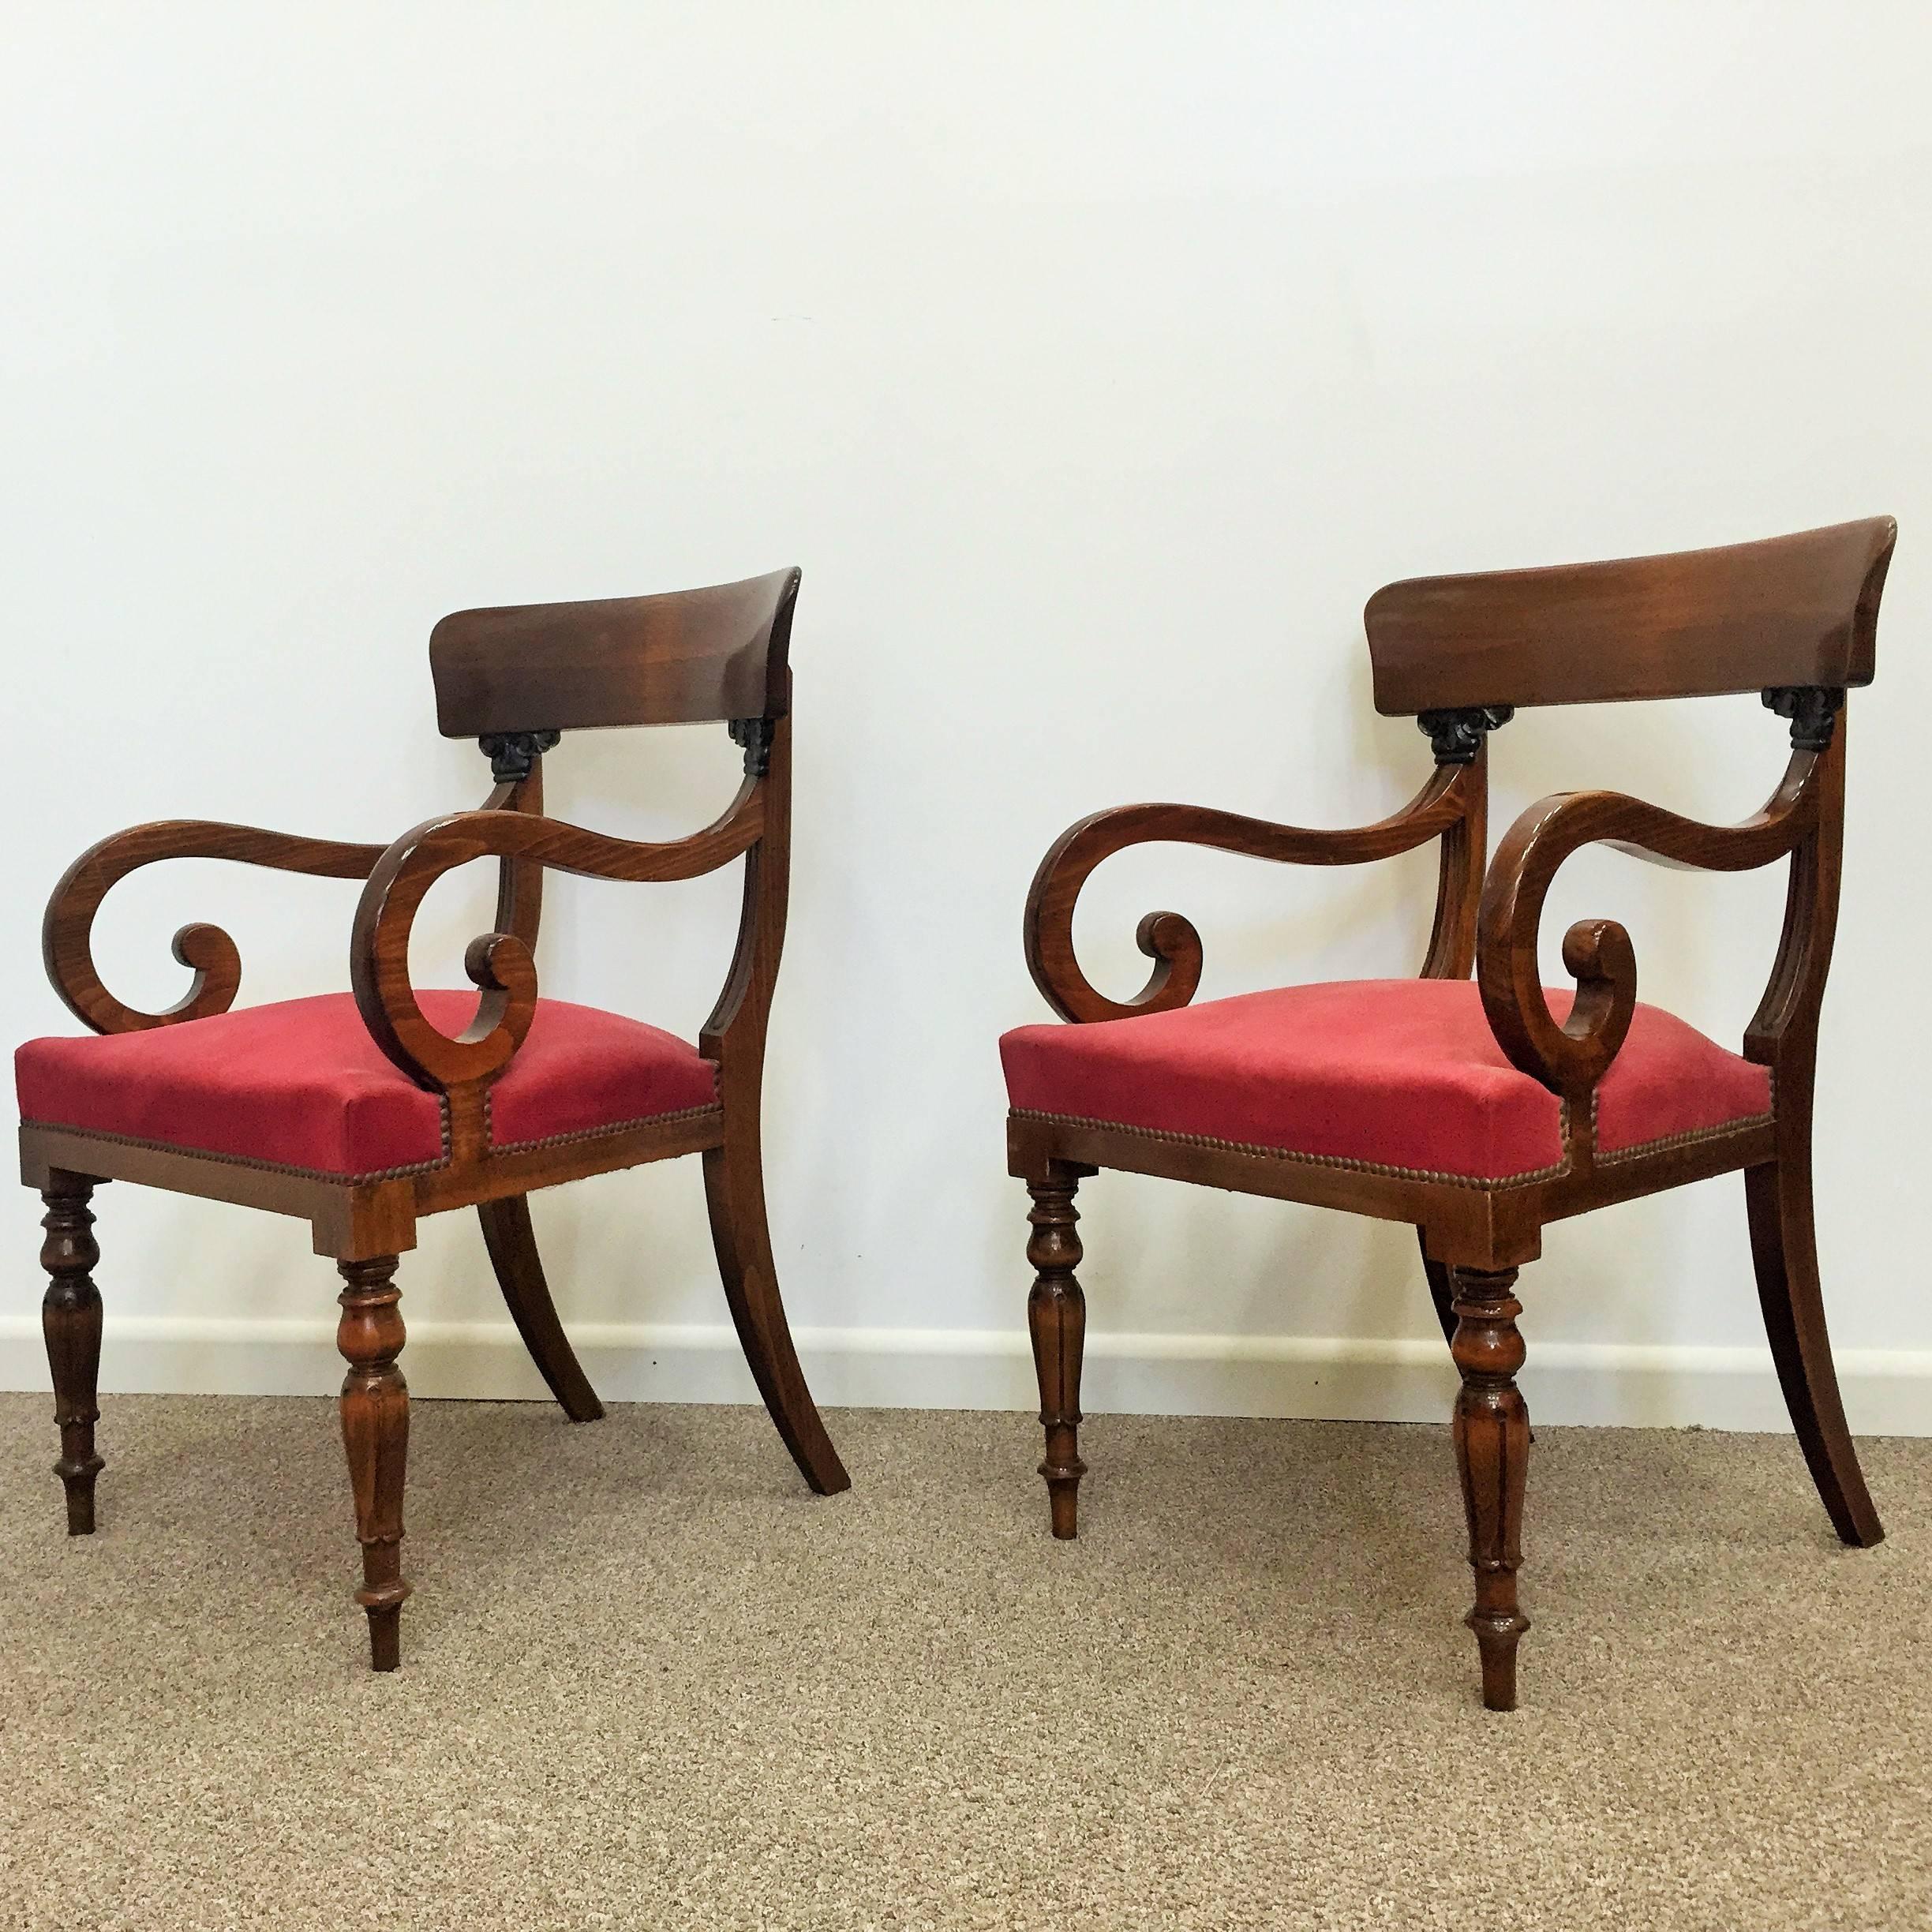 Mid-19th Century Pair of Swedish Empire Armchairs For Sale